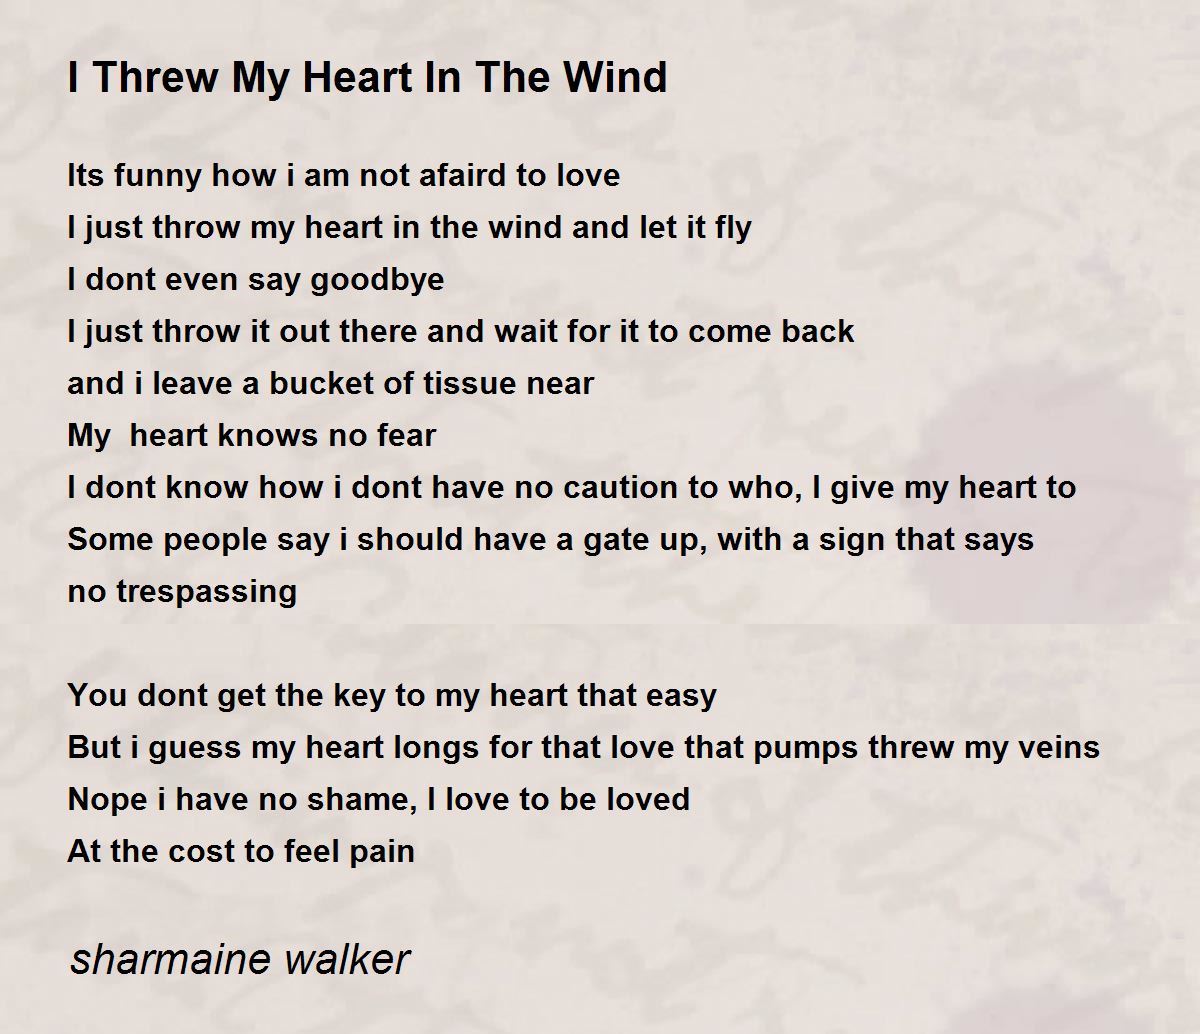 I Threw My Heart In The Wind - I Threw My Heart In The Wind Poem by  sharmaine walker